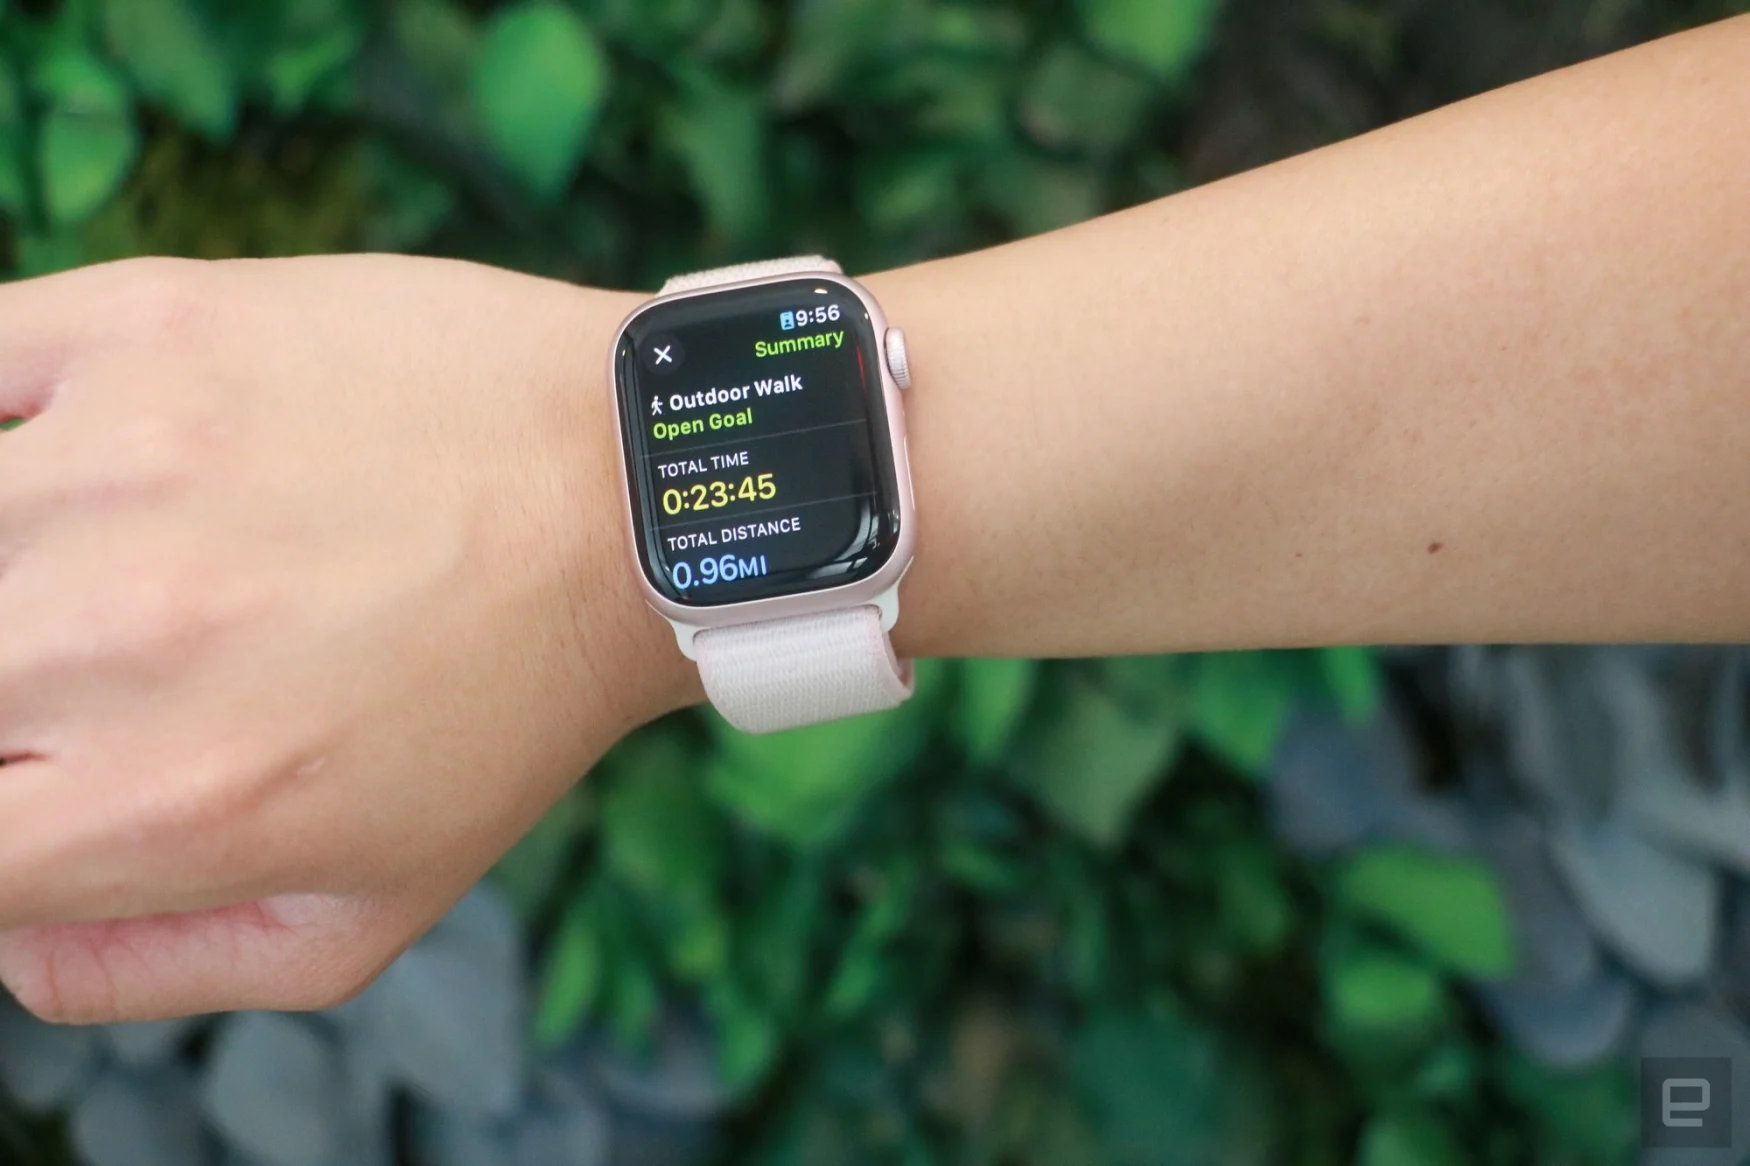 The Apple Watch Series 9 on a person's wrist in front of some green foliage, showing the summary of an outdoor walk workout.